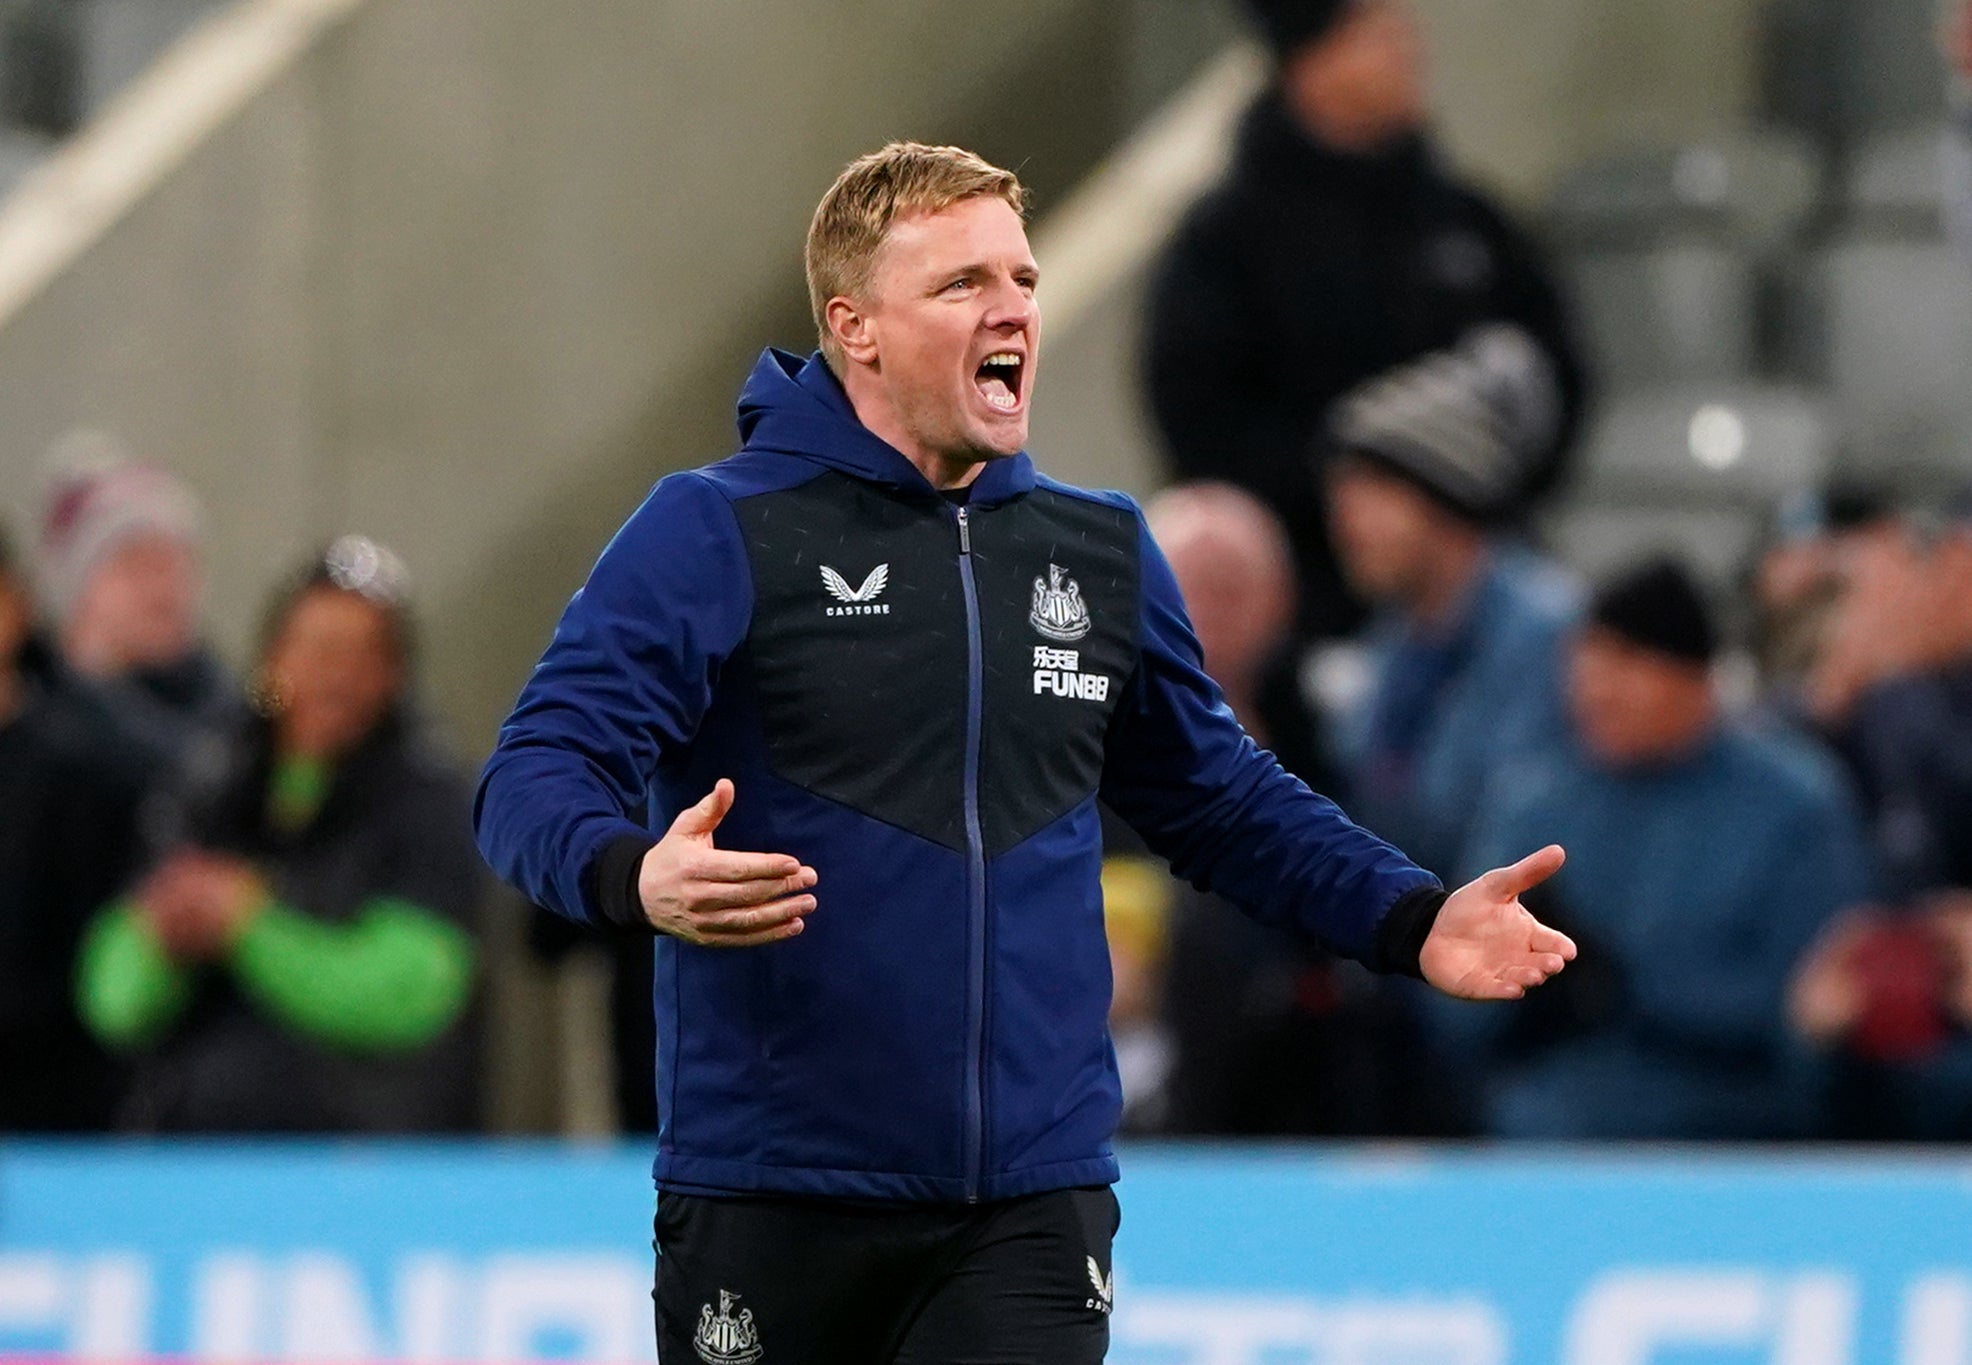 Eddie Howe has led Newcastle to staying up this season